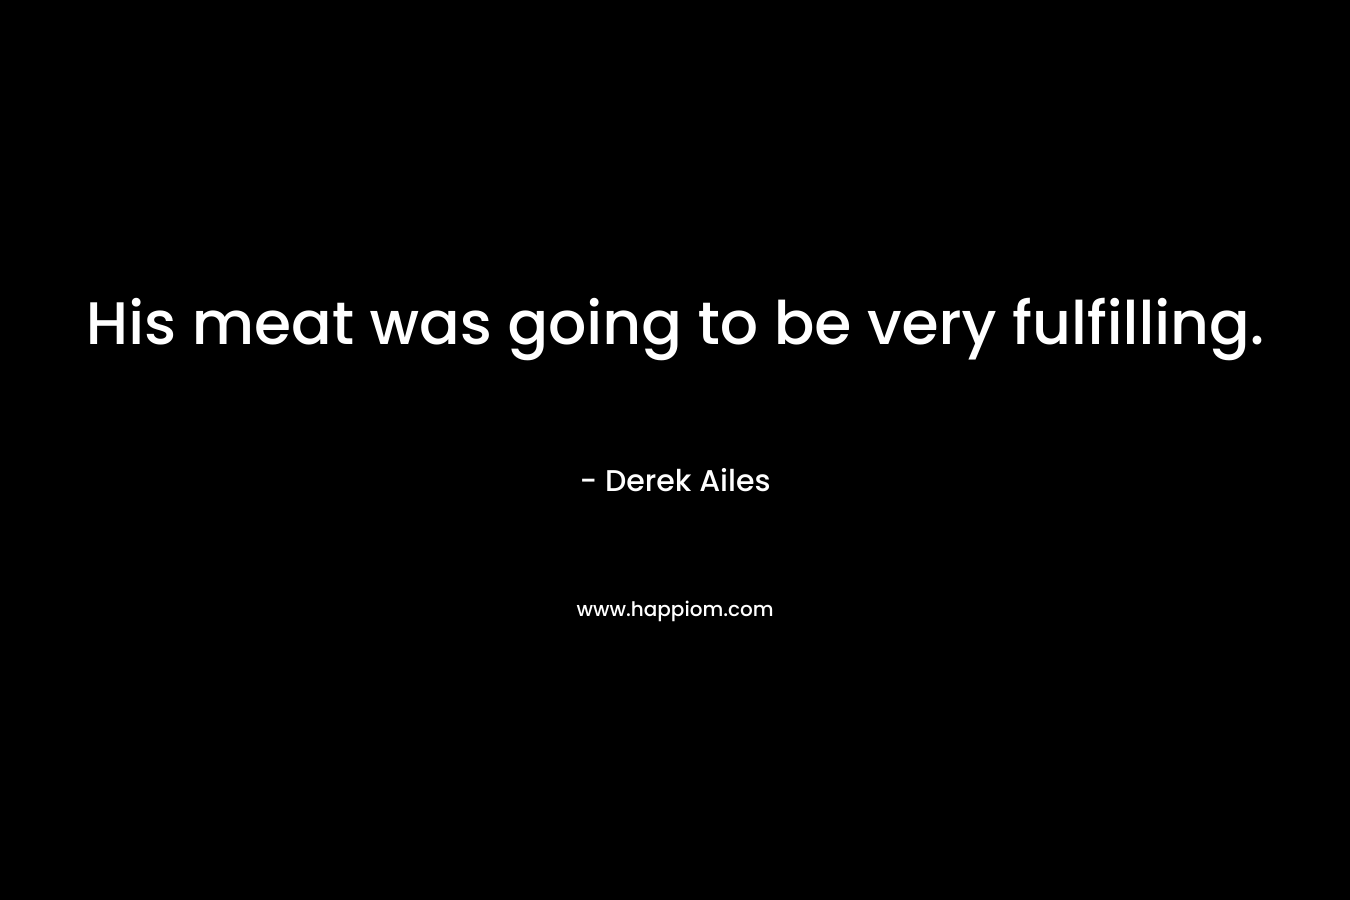 His meat was going to be very fulfilling. – Derek Ailes